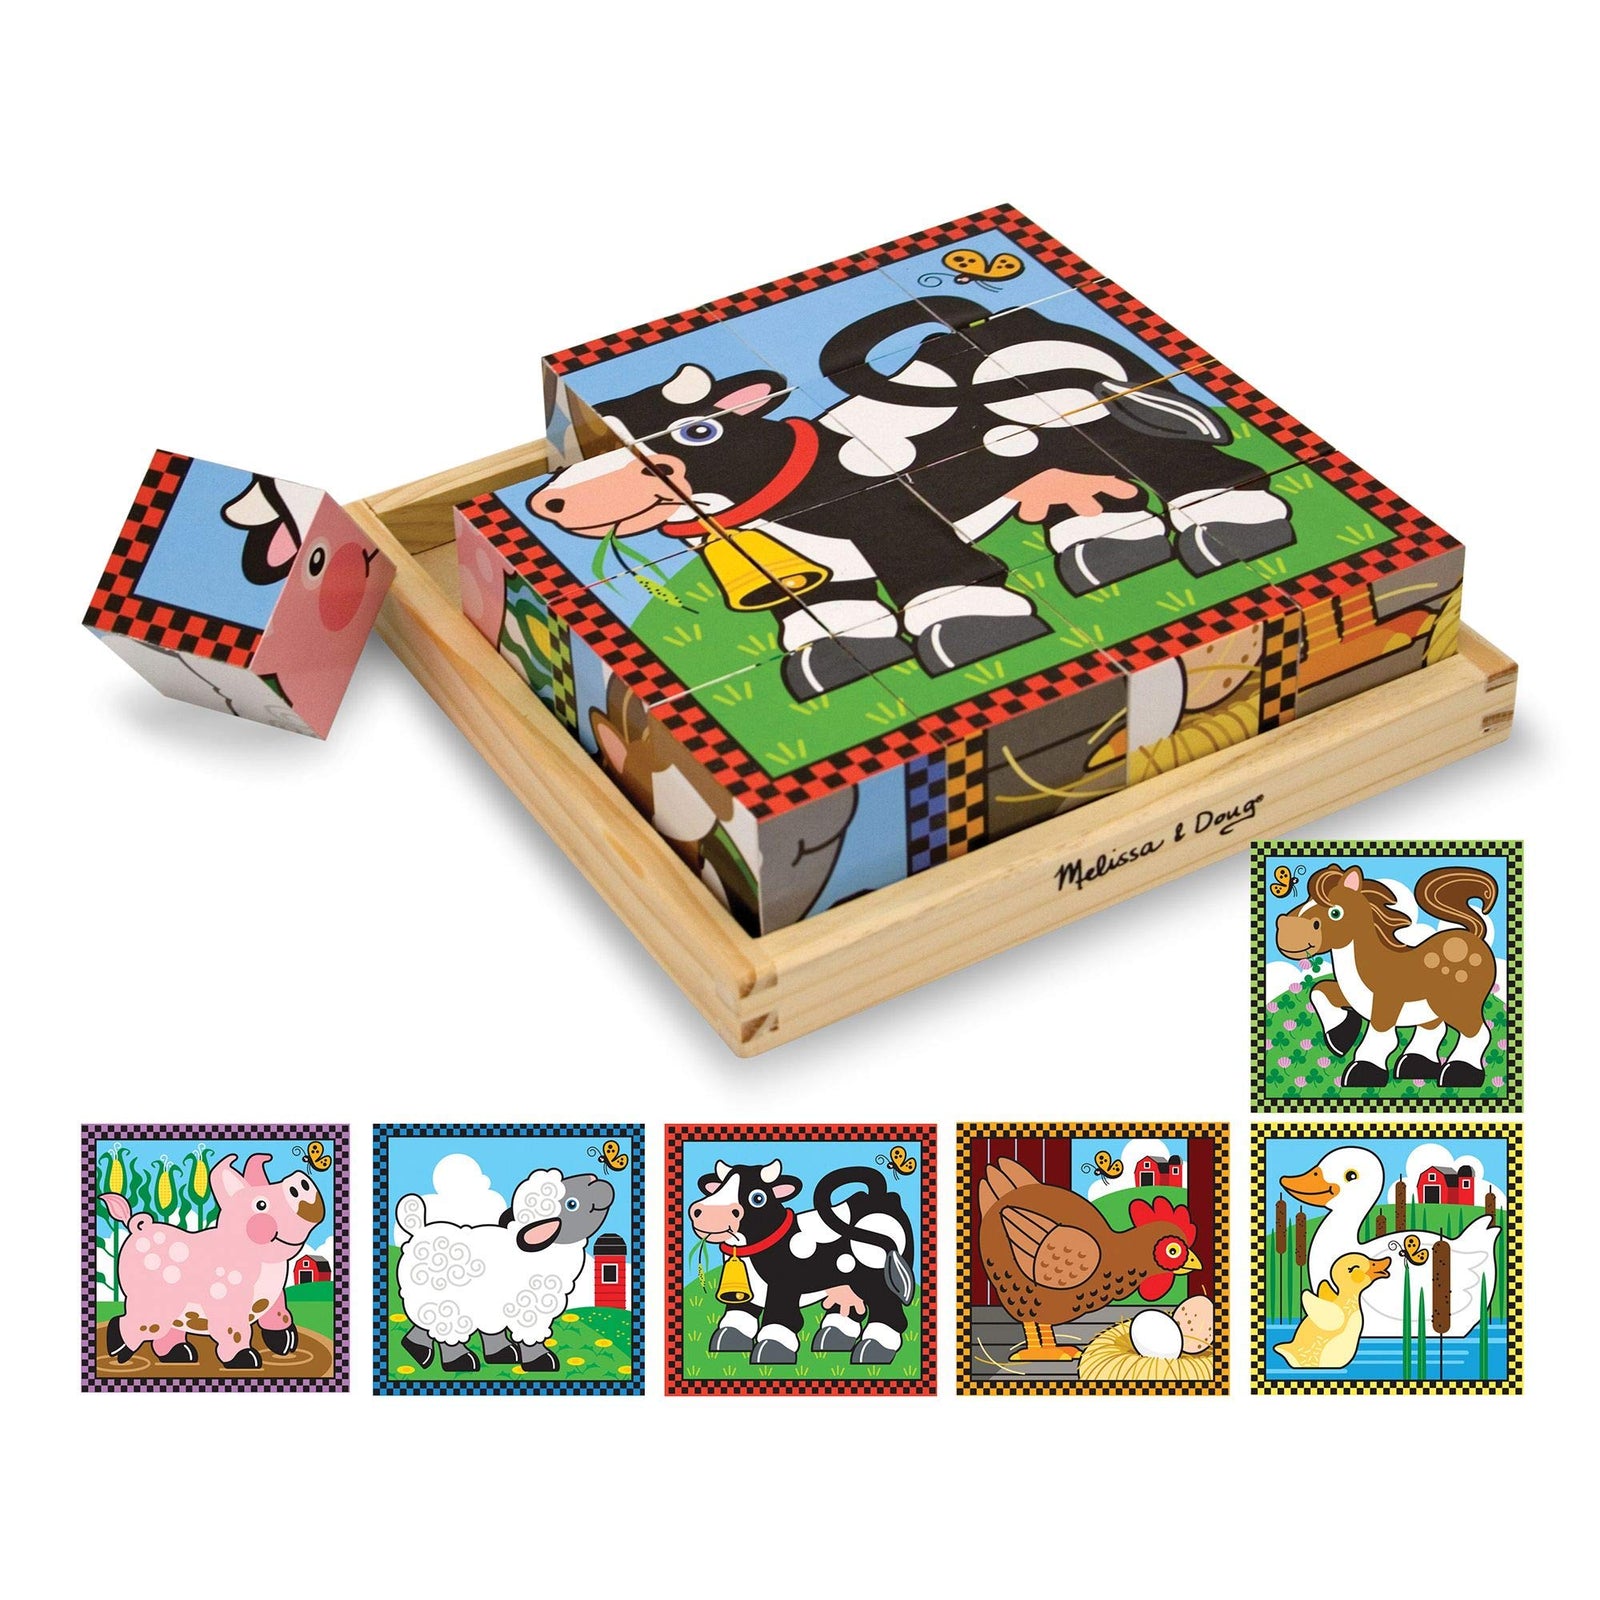 Melissa & Doug Farm Wooden Cube Puzzle With Storage Tray - 6 Puzzles in 1 (16 pcs)